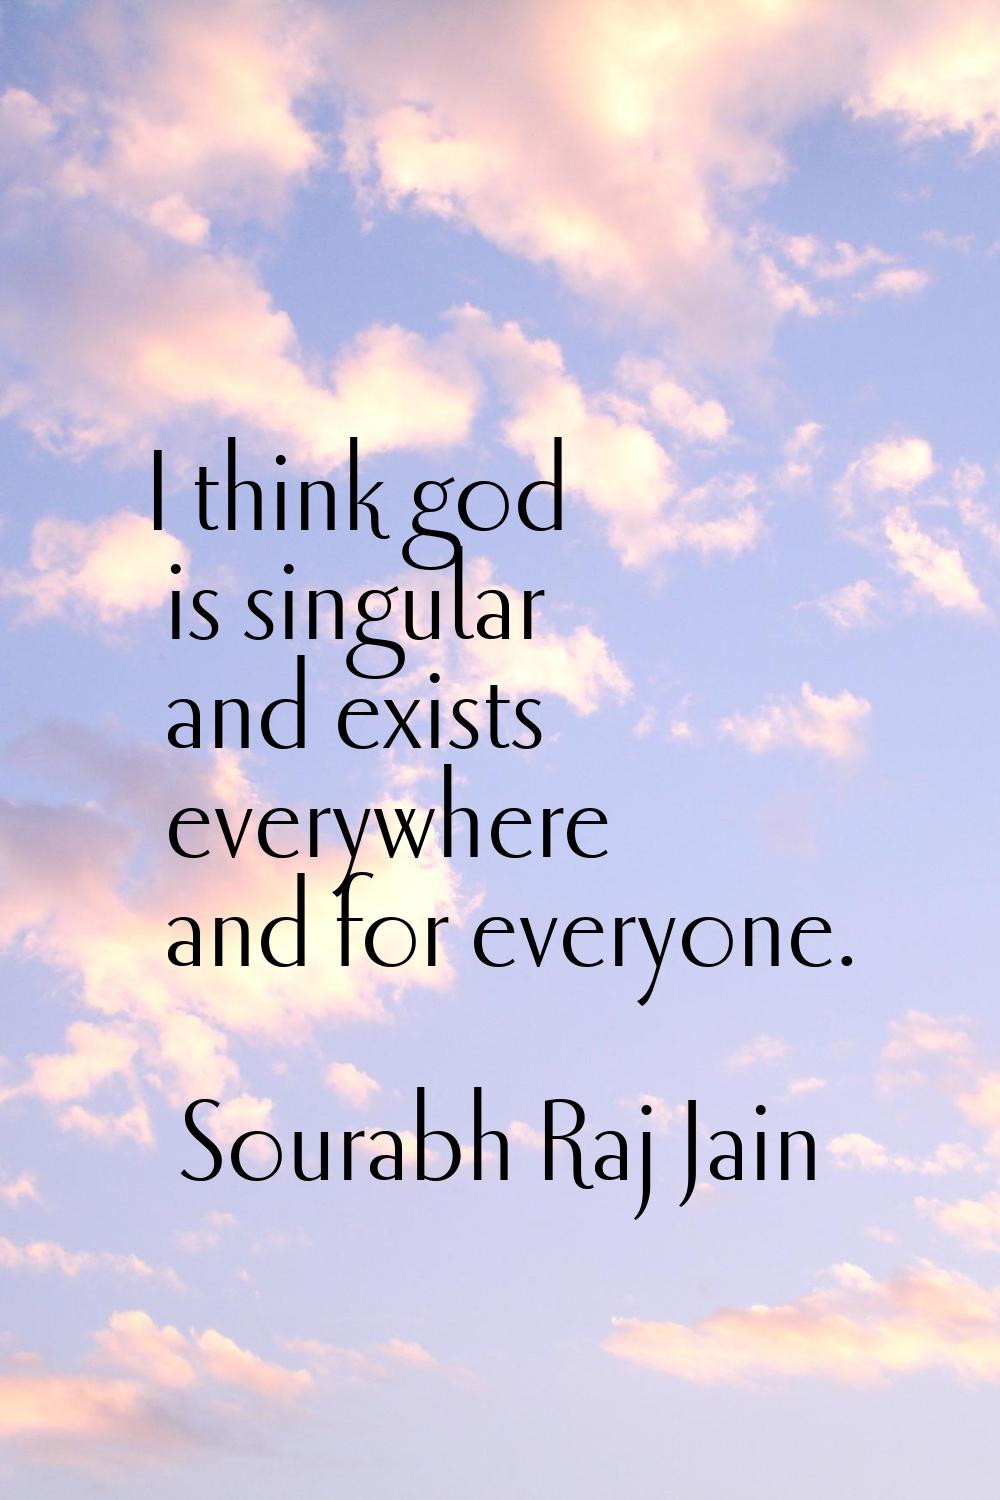 I think god is singular and exists everywhere and for everyone.